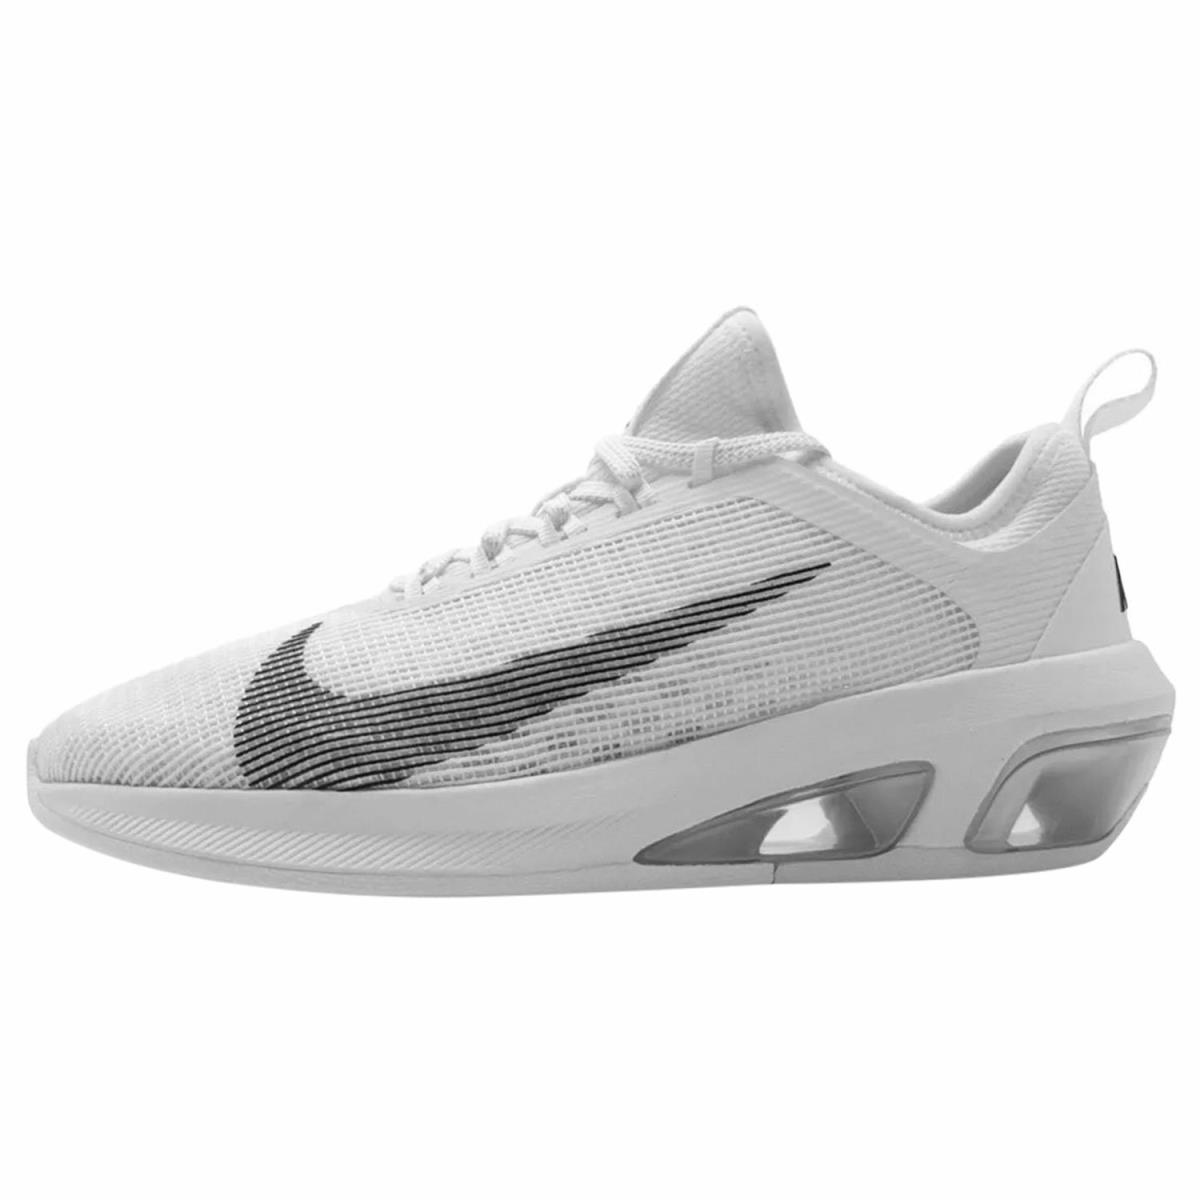 Nike Air Max Fly Mens AT2506-100 White Black Silver Running Shoes Size 10